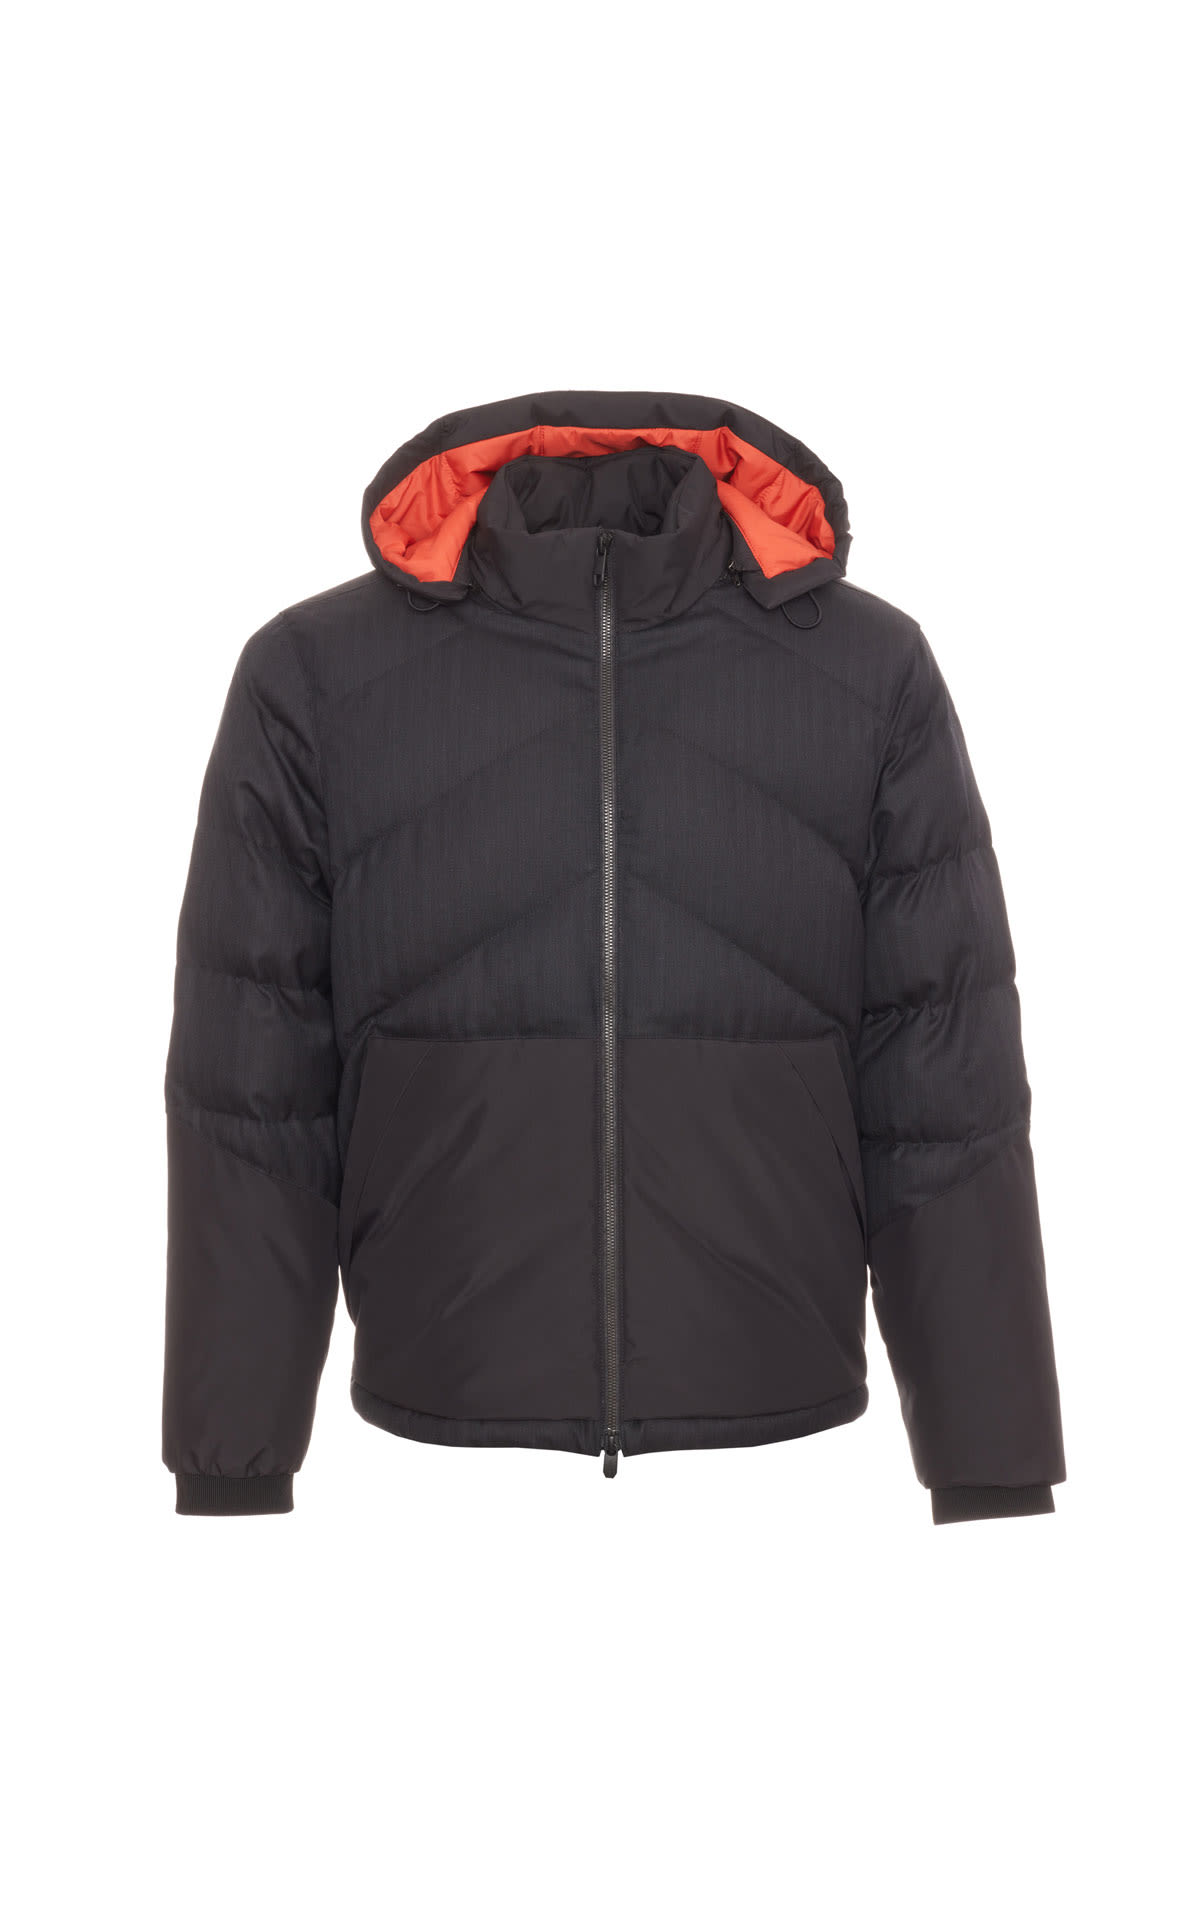 Zegna Puffer from Bicester Village